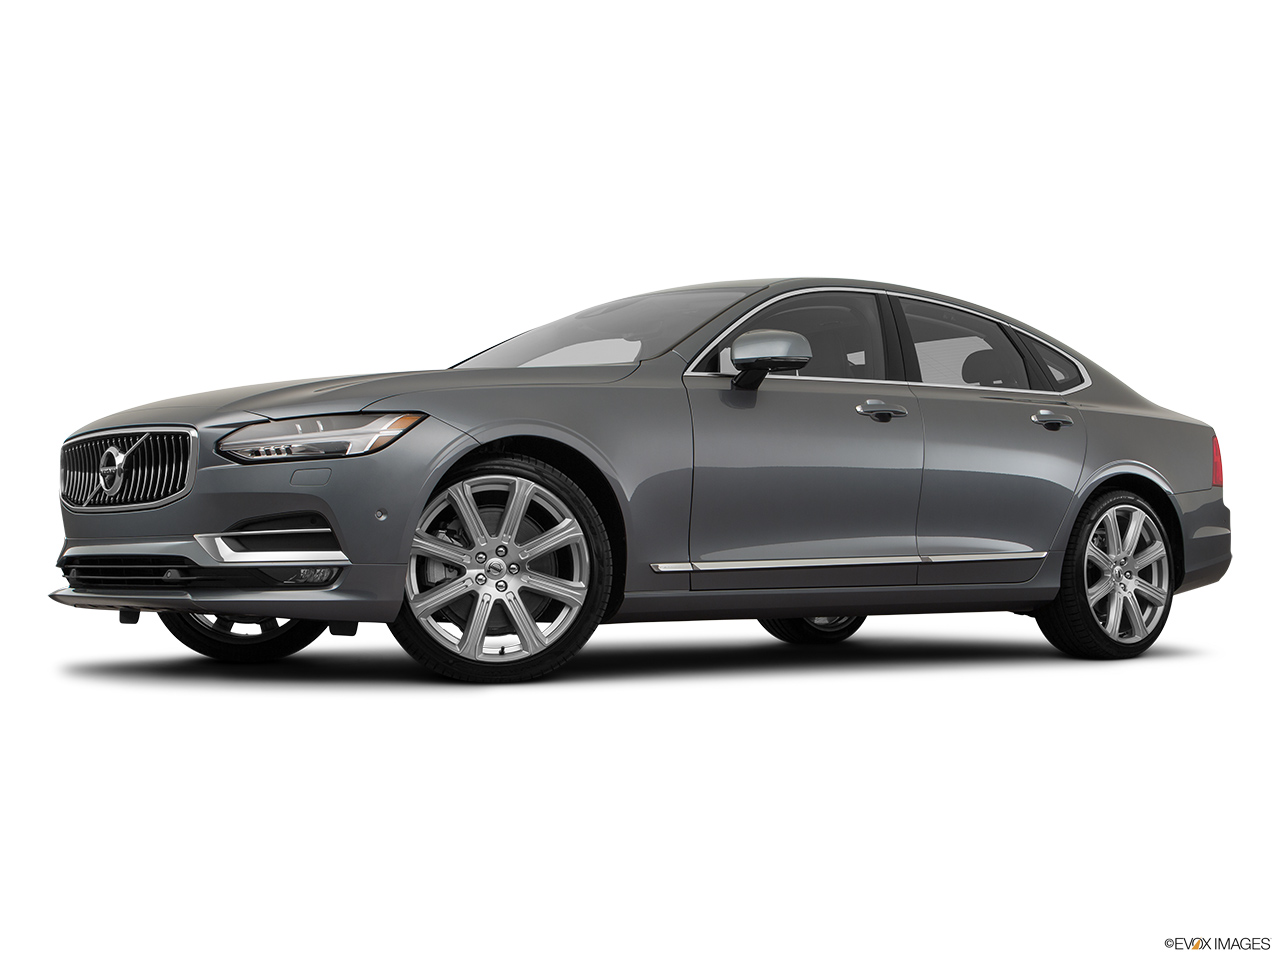 2017 Volvo S90 T6 Inscription Low/wide front 5/8. 